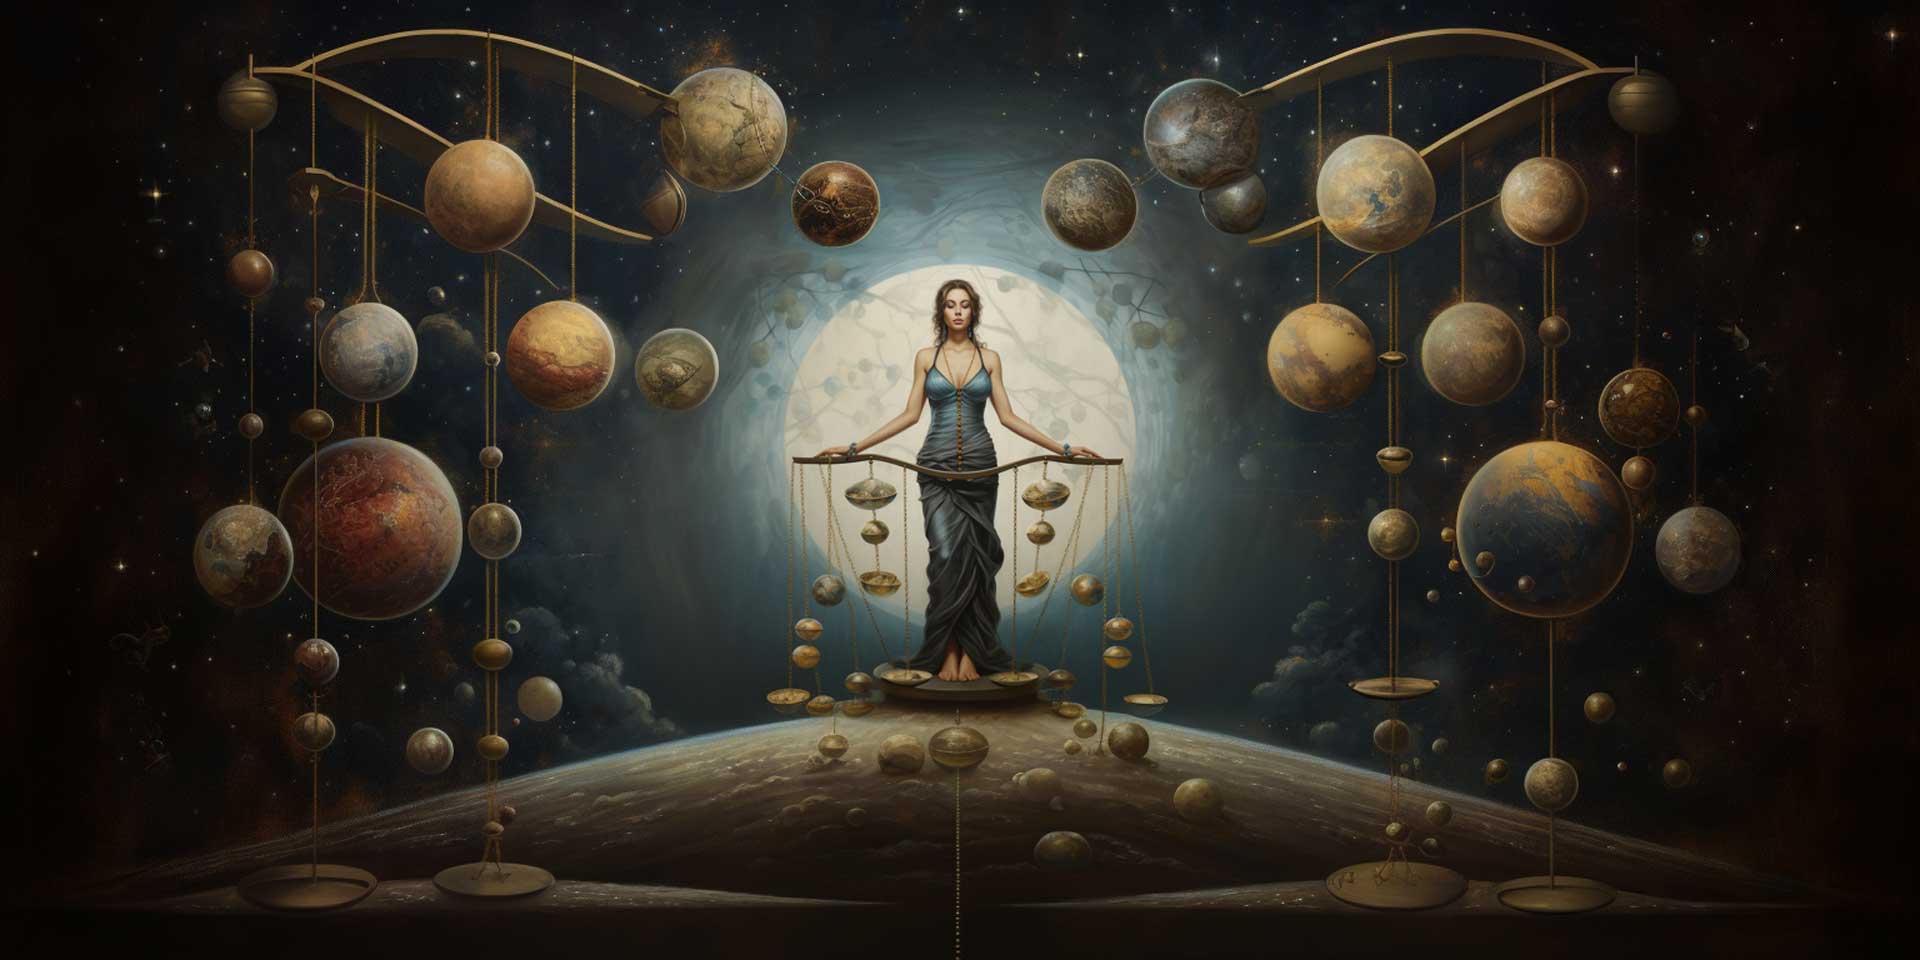 A woman standing in space holding a balanced scale. She represents Life Path 2